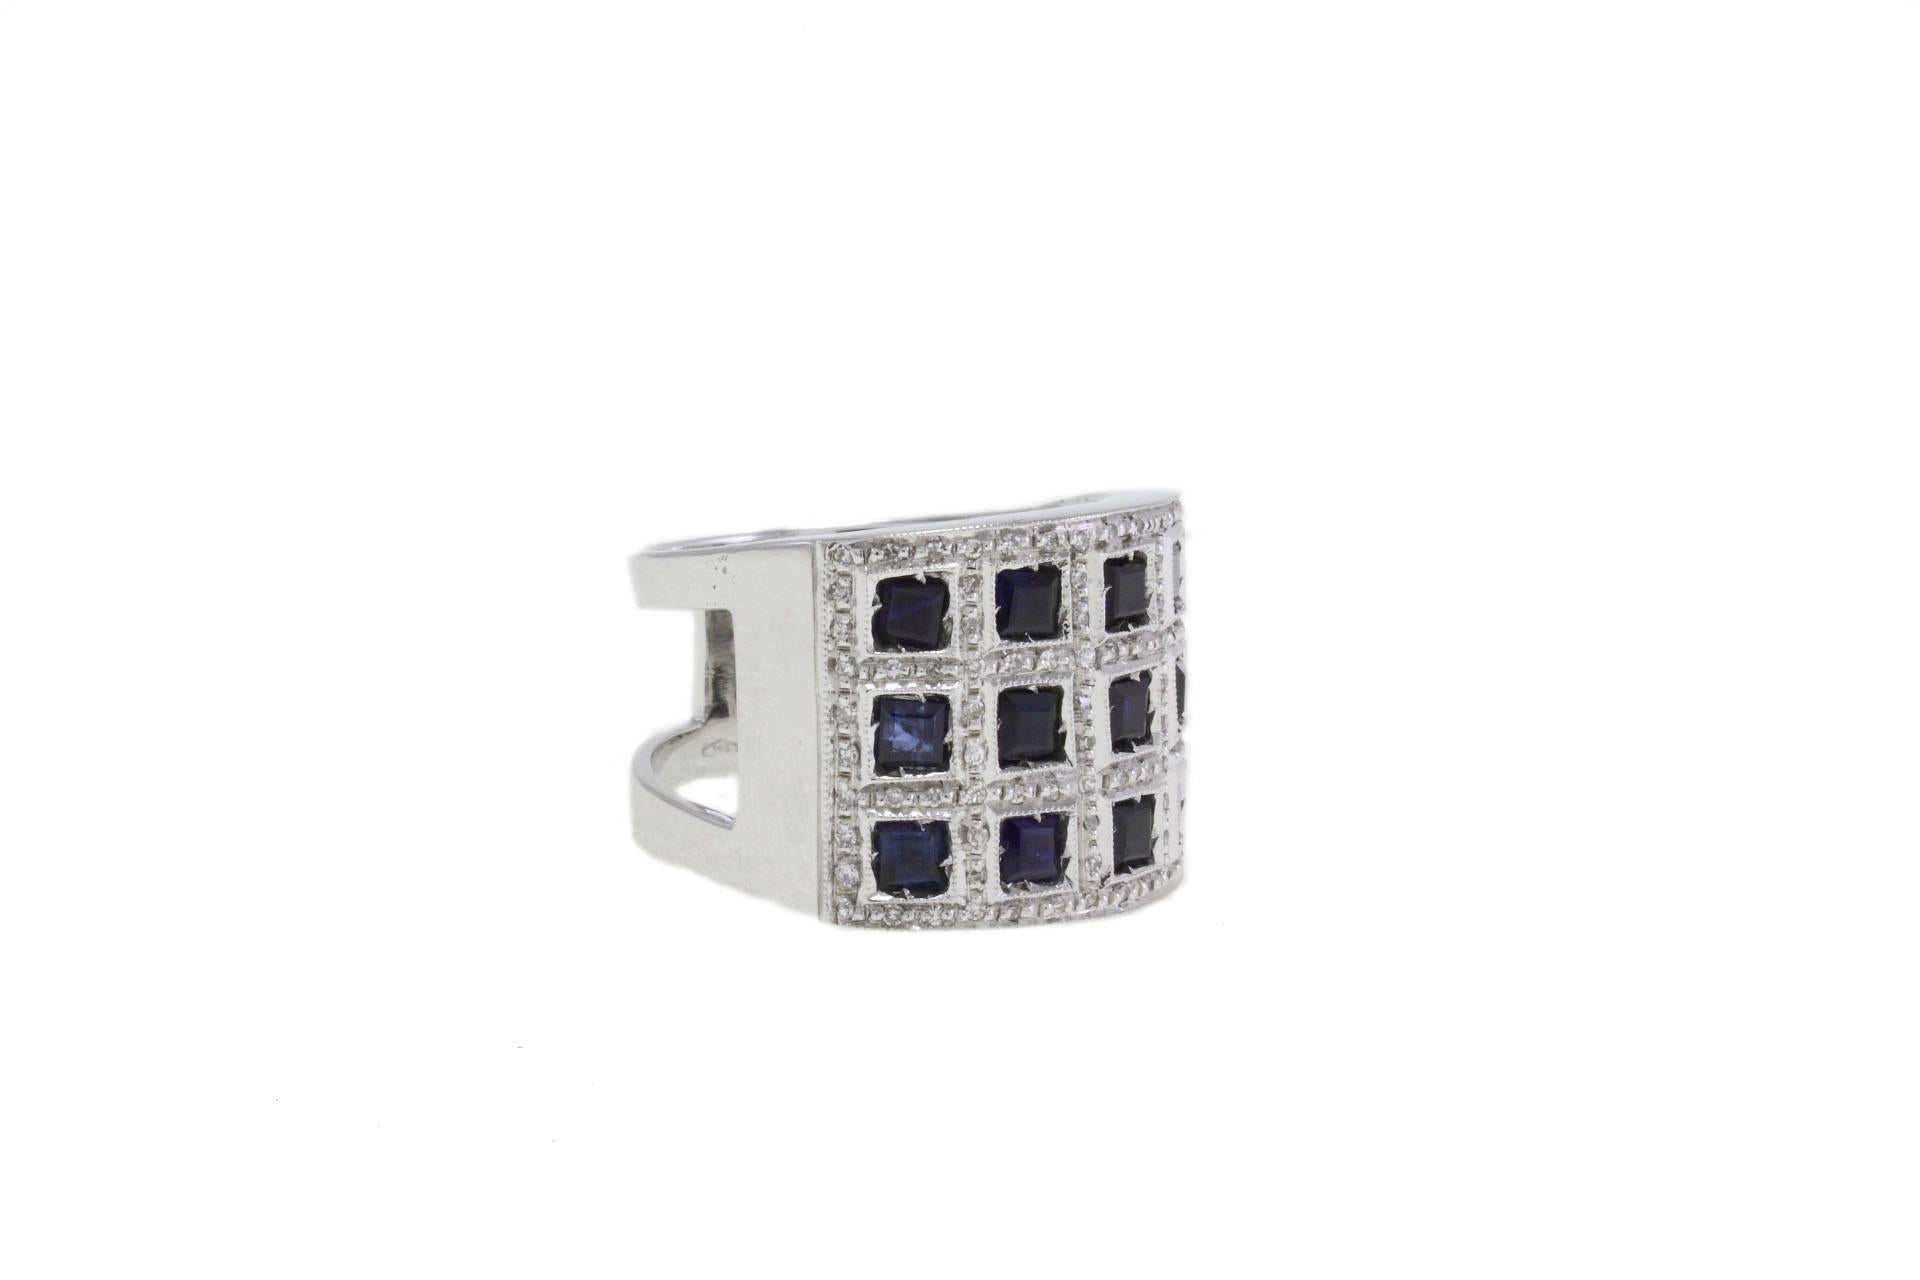 Sparkling ring in 14K white gold composede of encrusted blue sapphires and icy white brilliant-cut genuine diamonds. This dome ring displays a dizzying array of stones with breathtaking illumination! 

sapphires 3.59kt
diamonds 0.36kt
tot weight